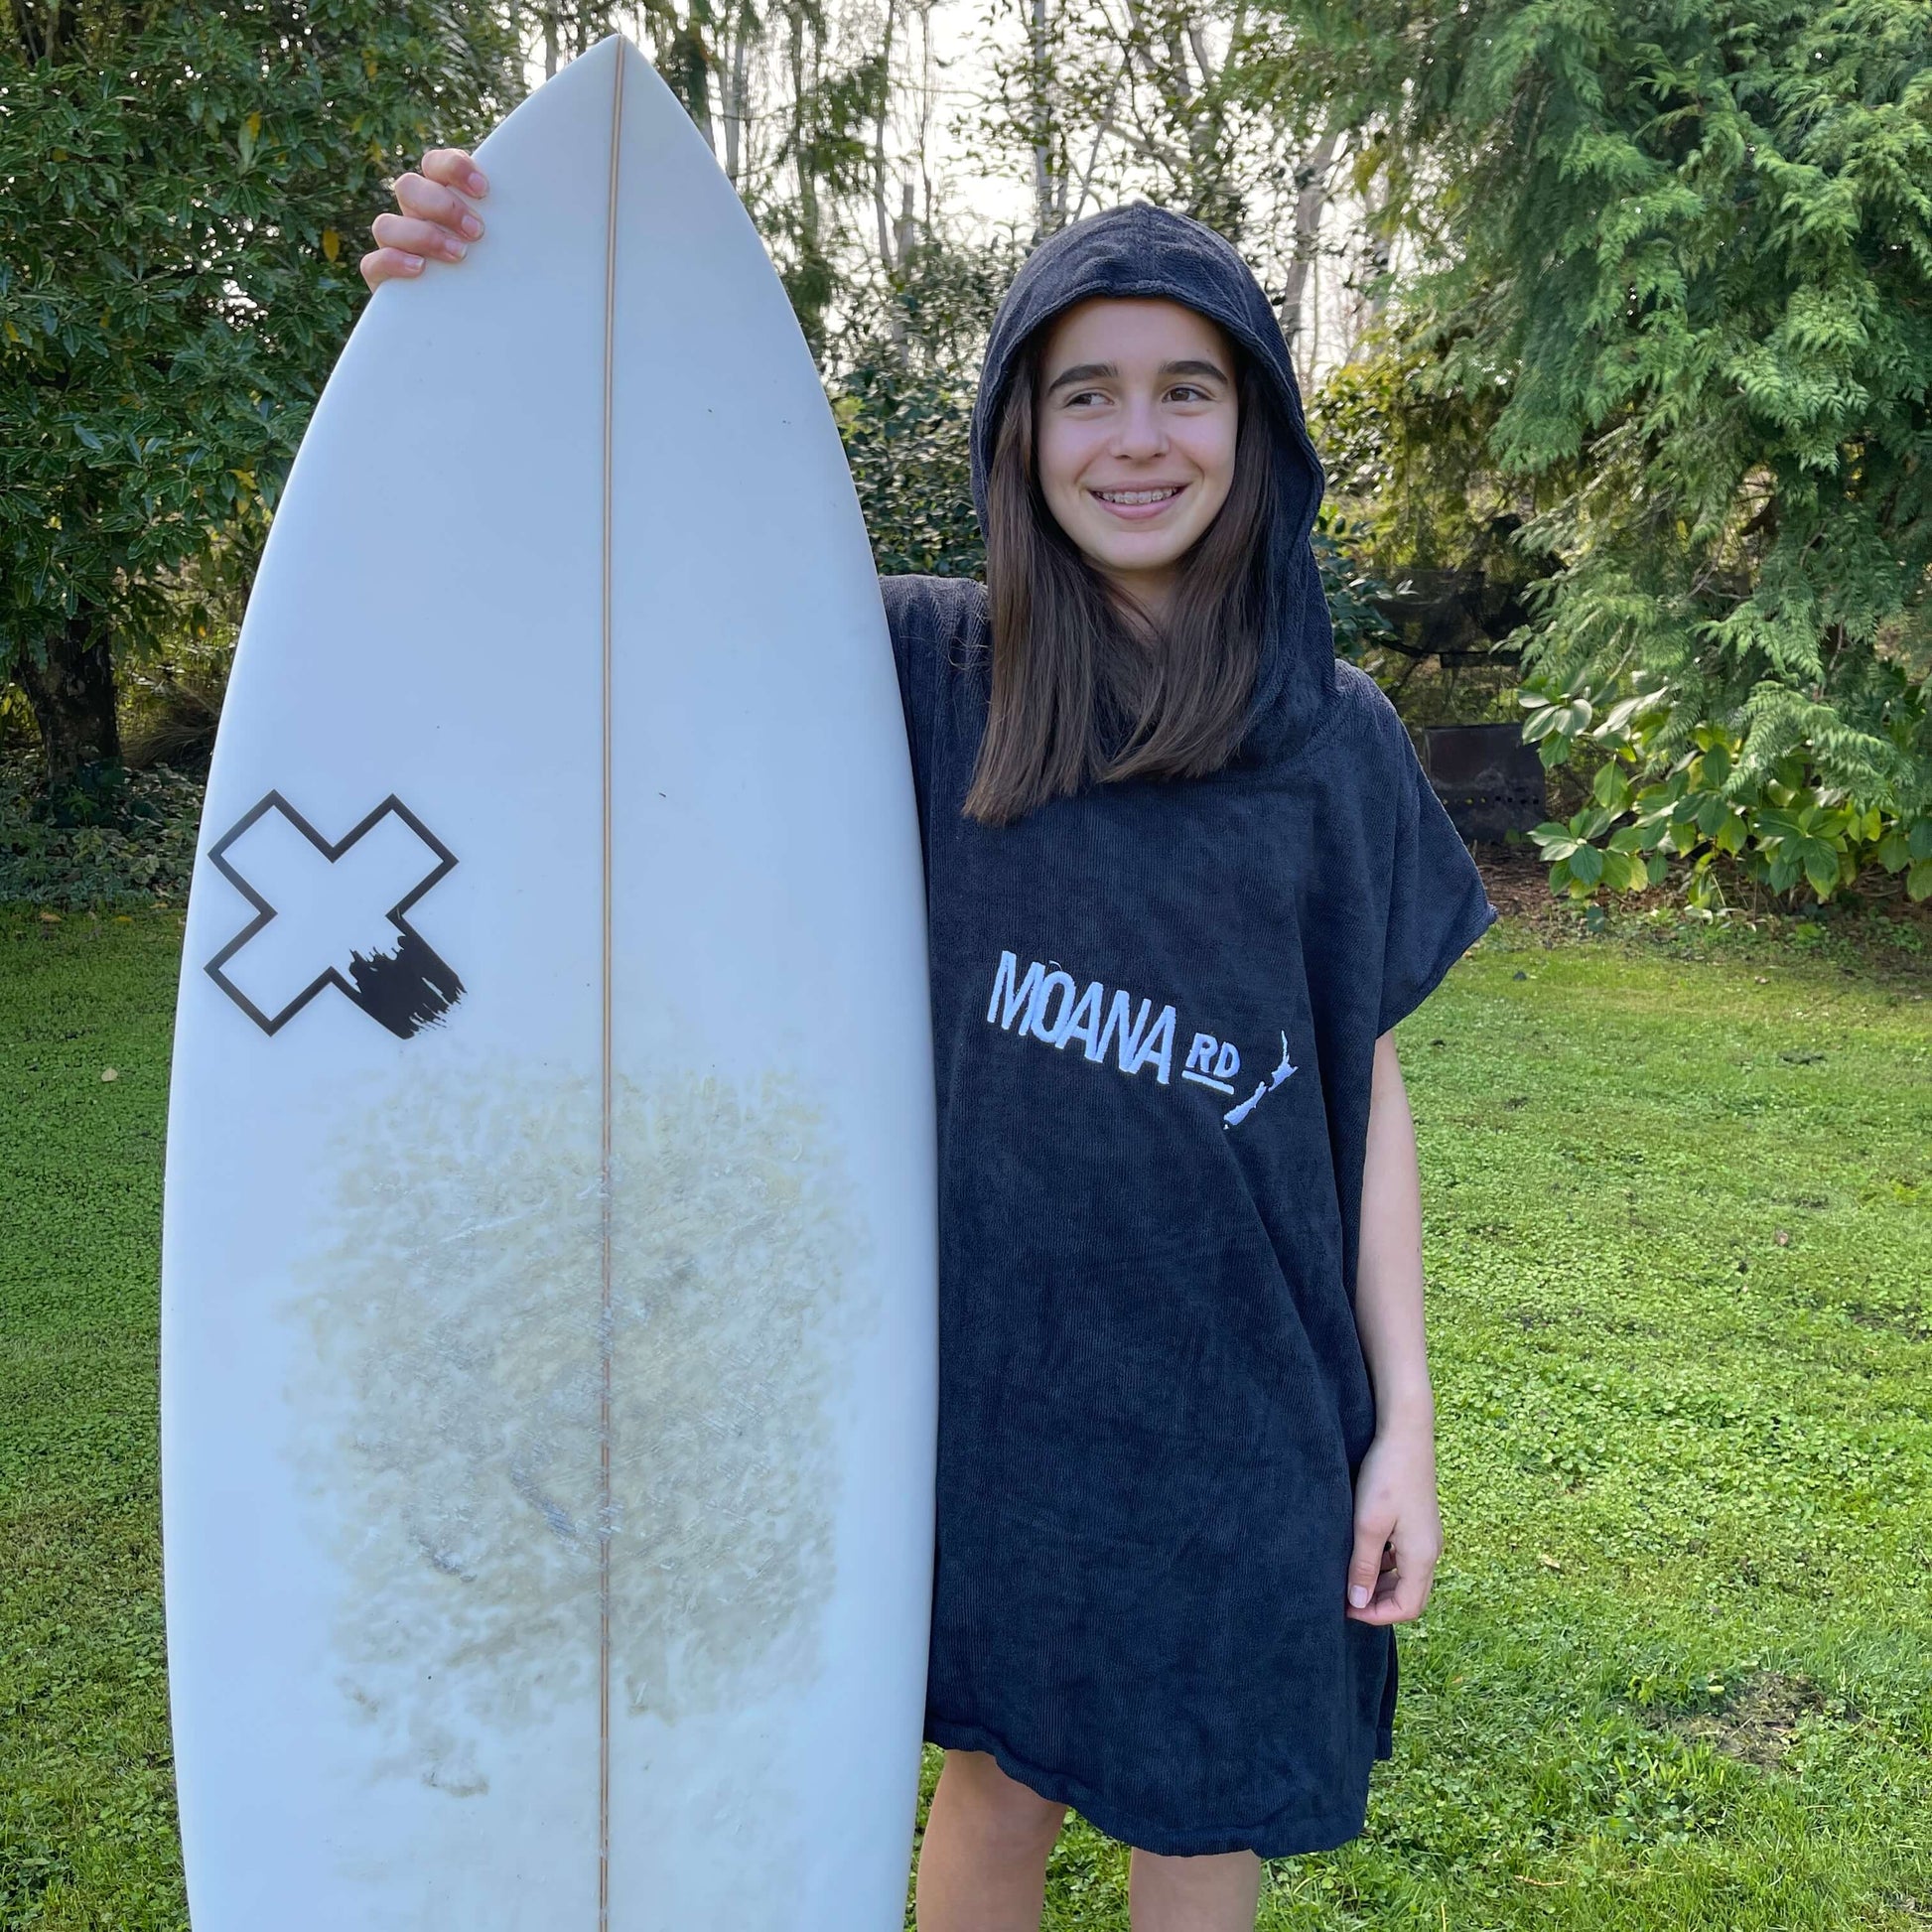 Young girl wearing a black towel hoodie with the words Moana RD on it in white and a map of New Zealand. She is holding a surfboard.